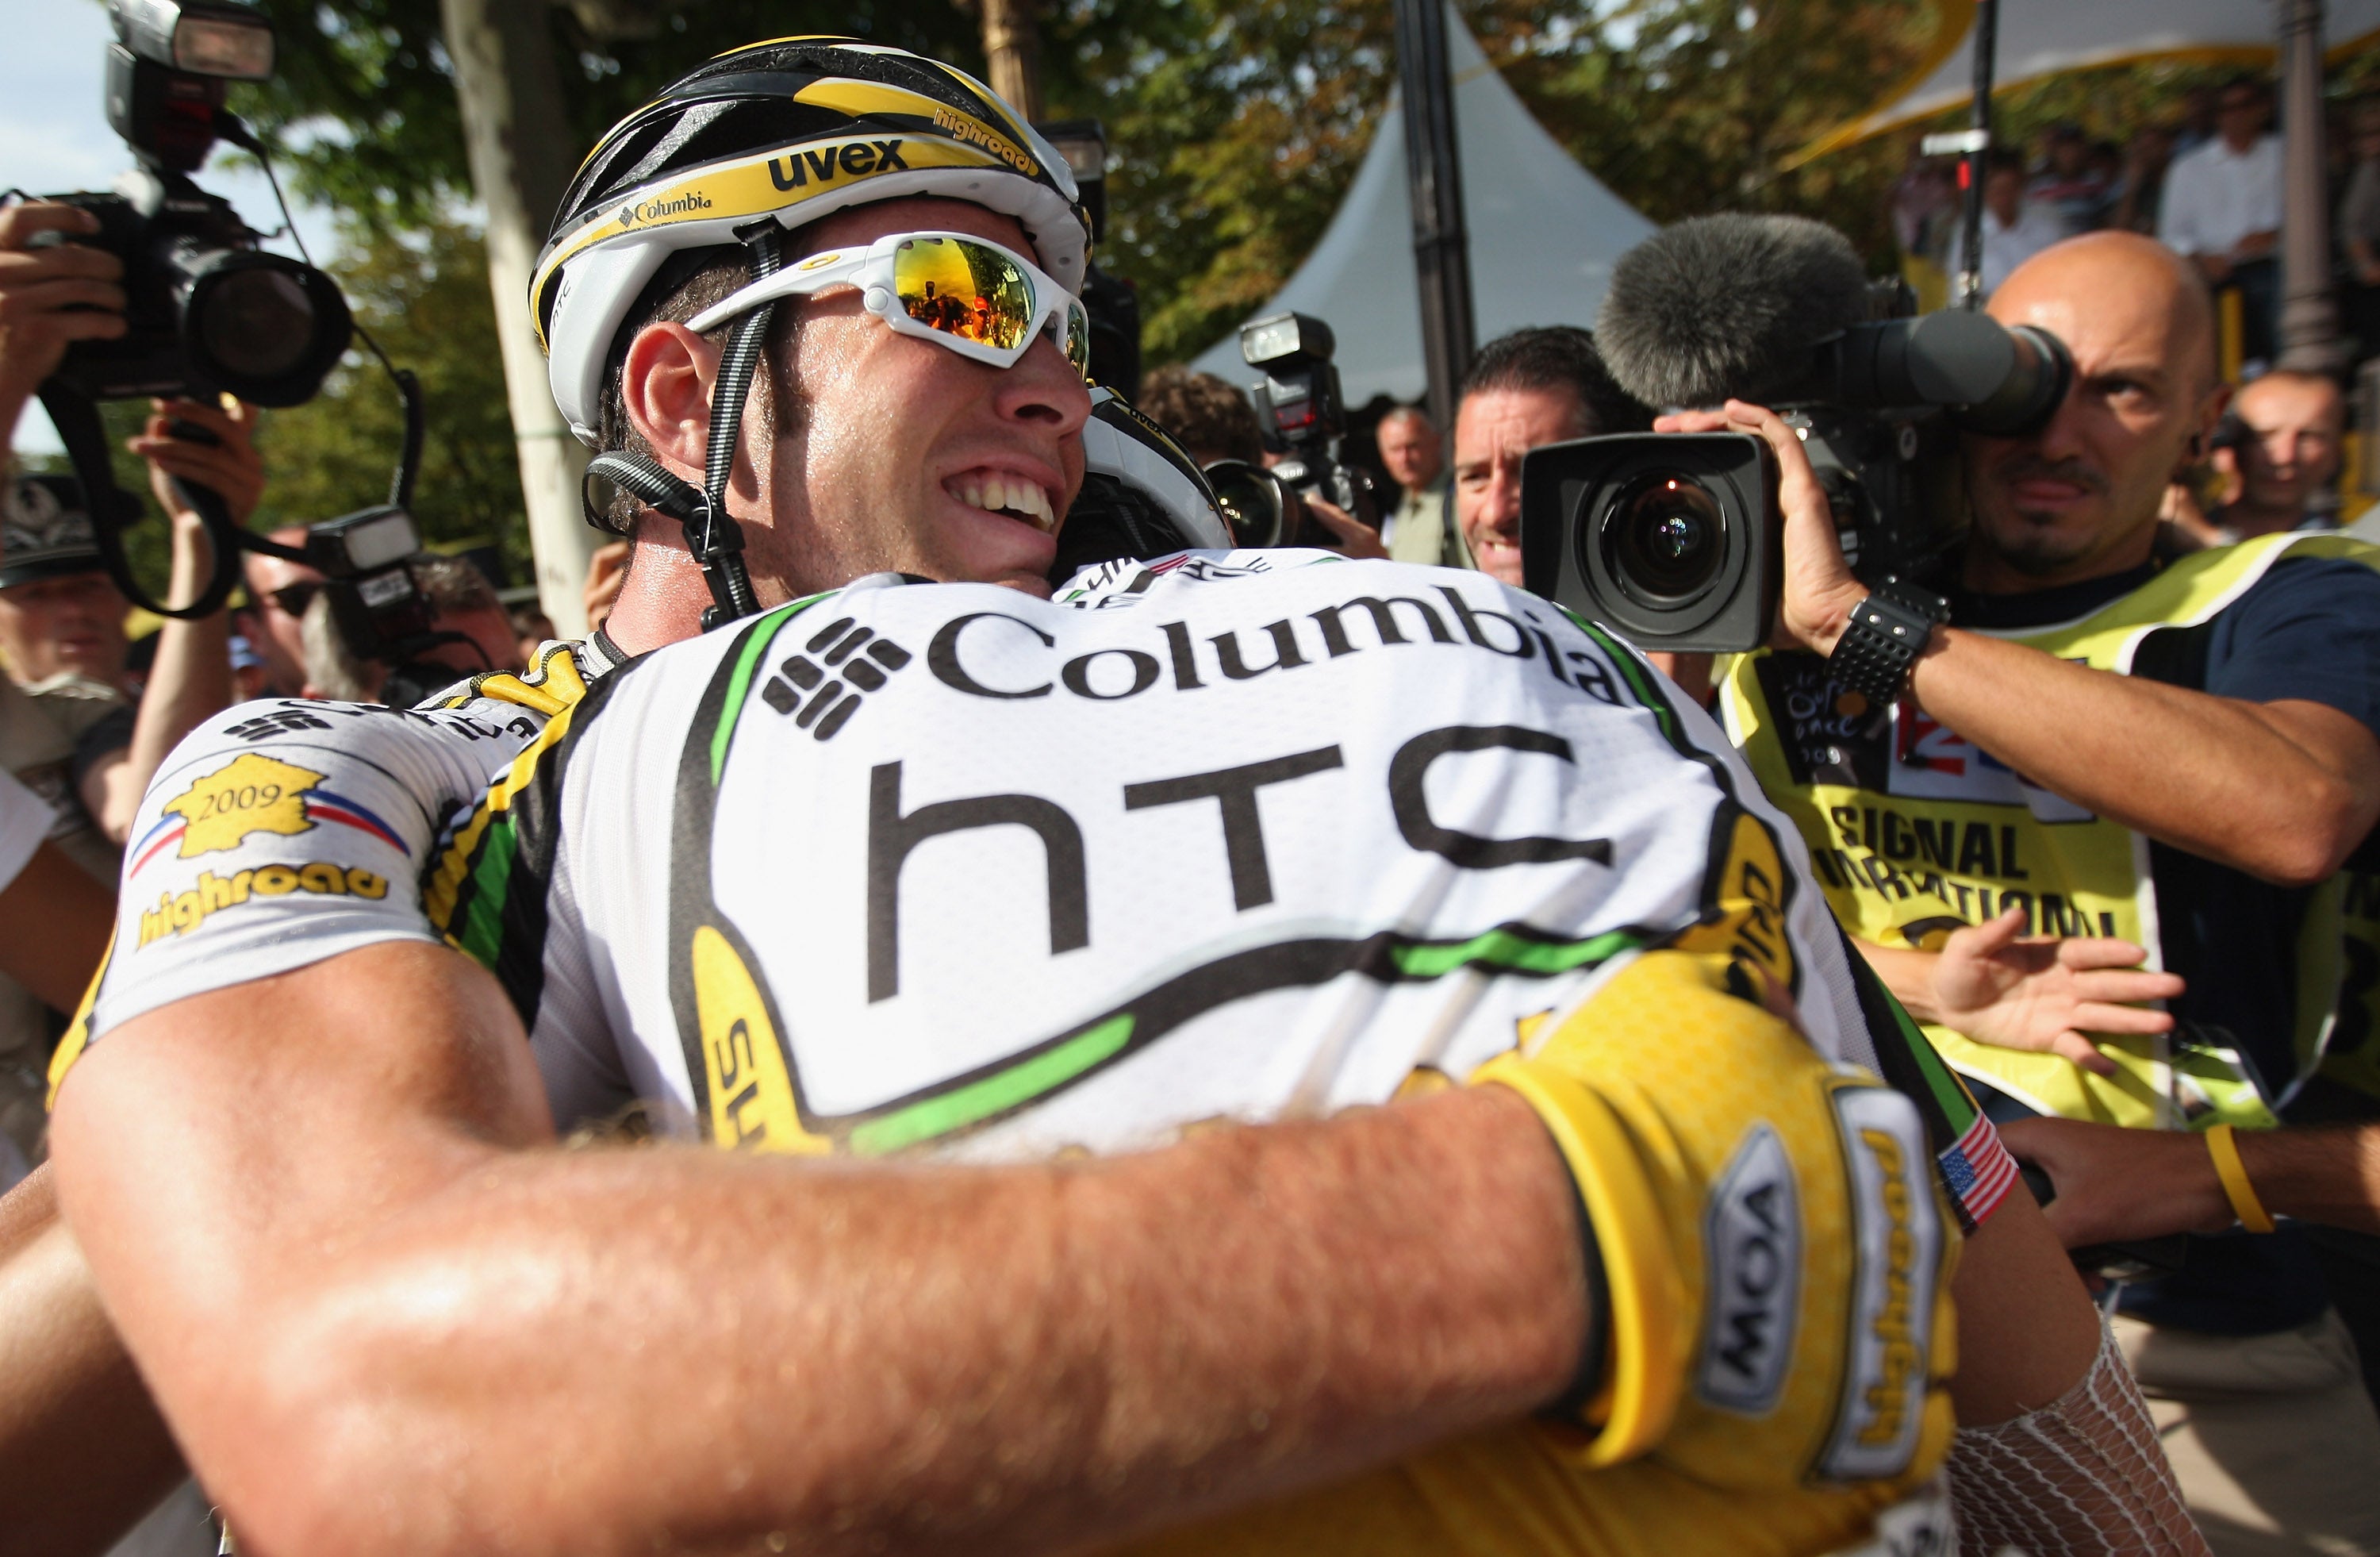 Cavendish and Renshaw embrace after winning stage 21 of the 2009 Tour in Paris